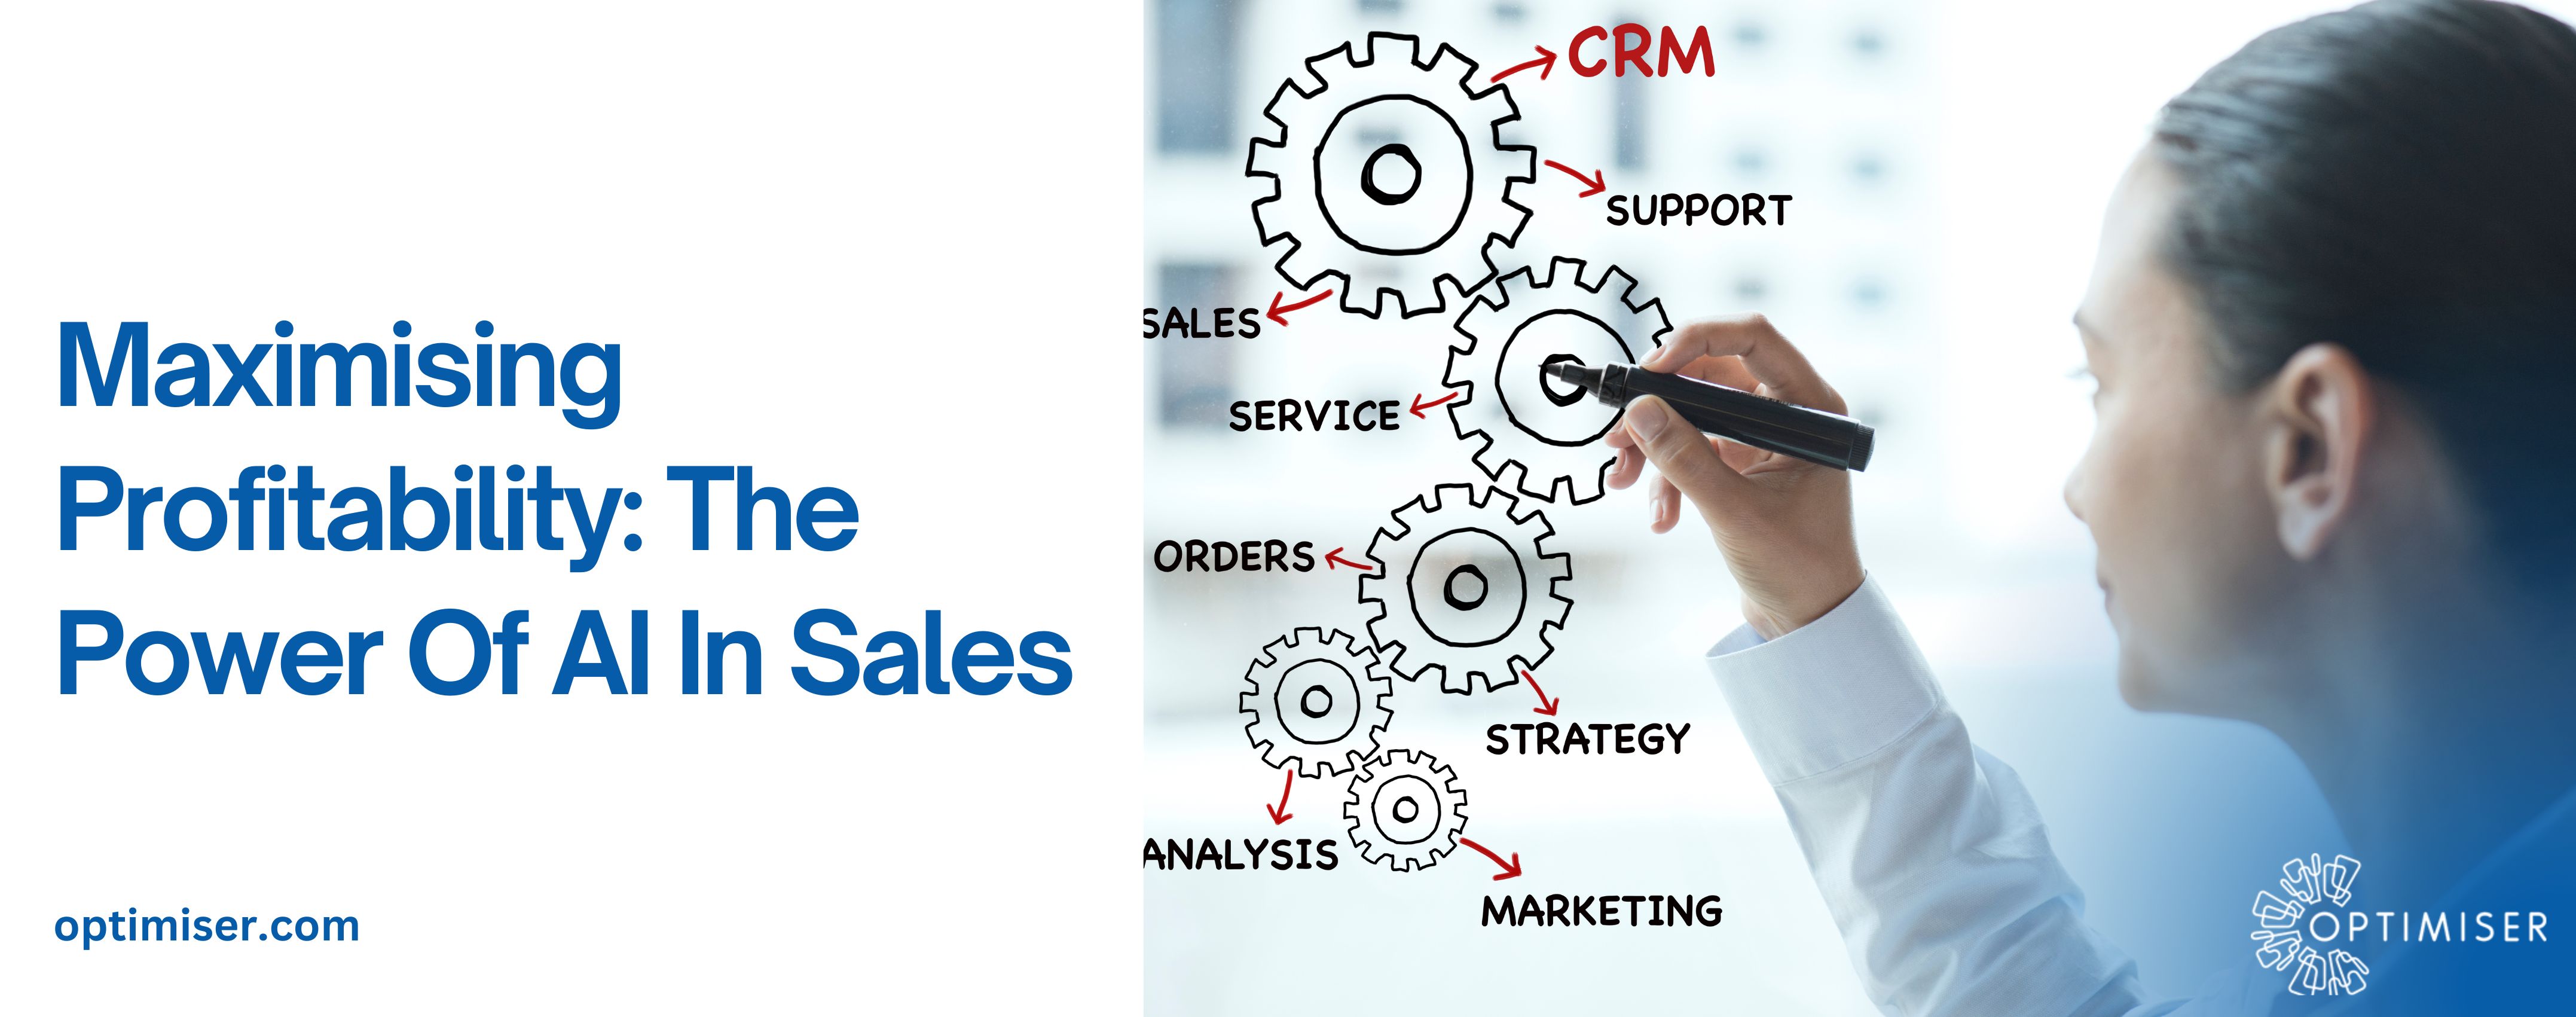 sales manager toolkit